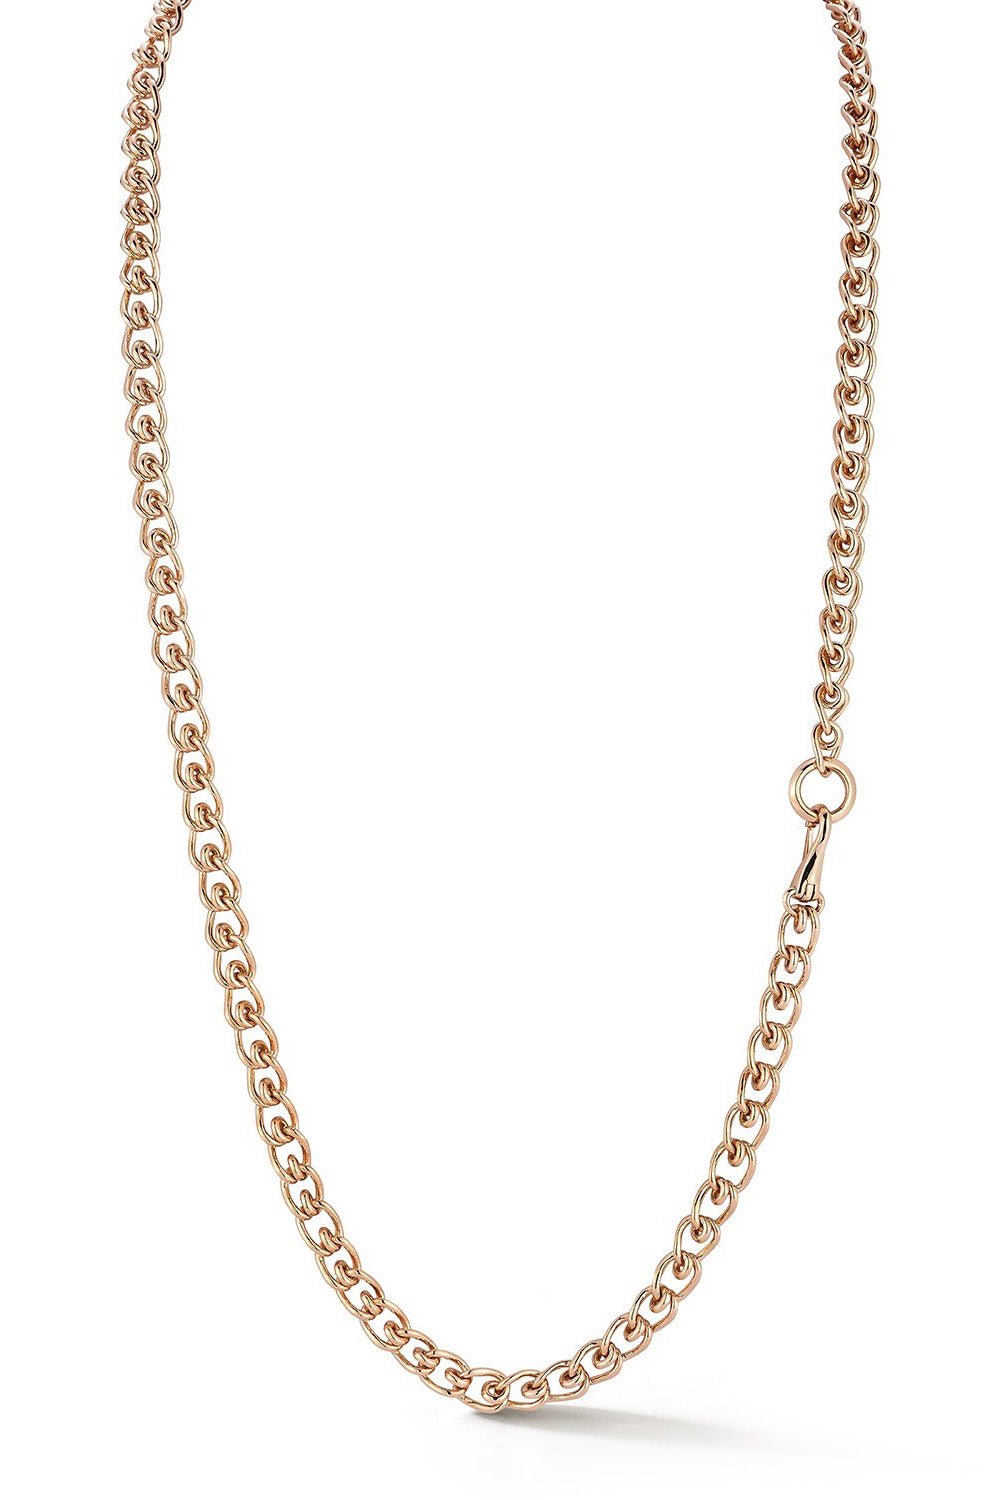 WALTERS FAITH-Huxley Coil Chain Necklace-YELLOW GOLD